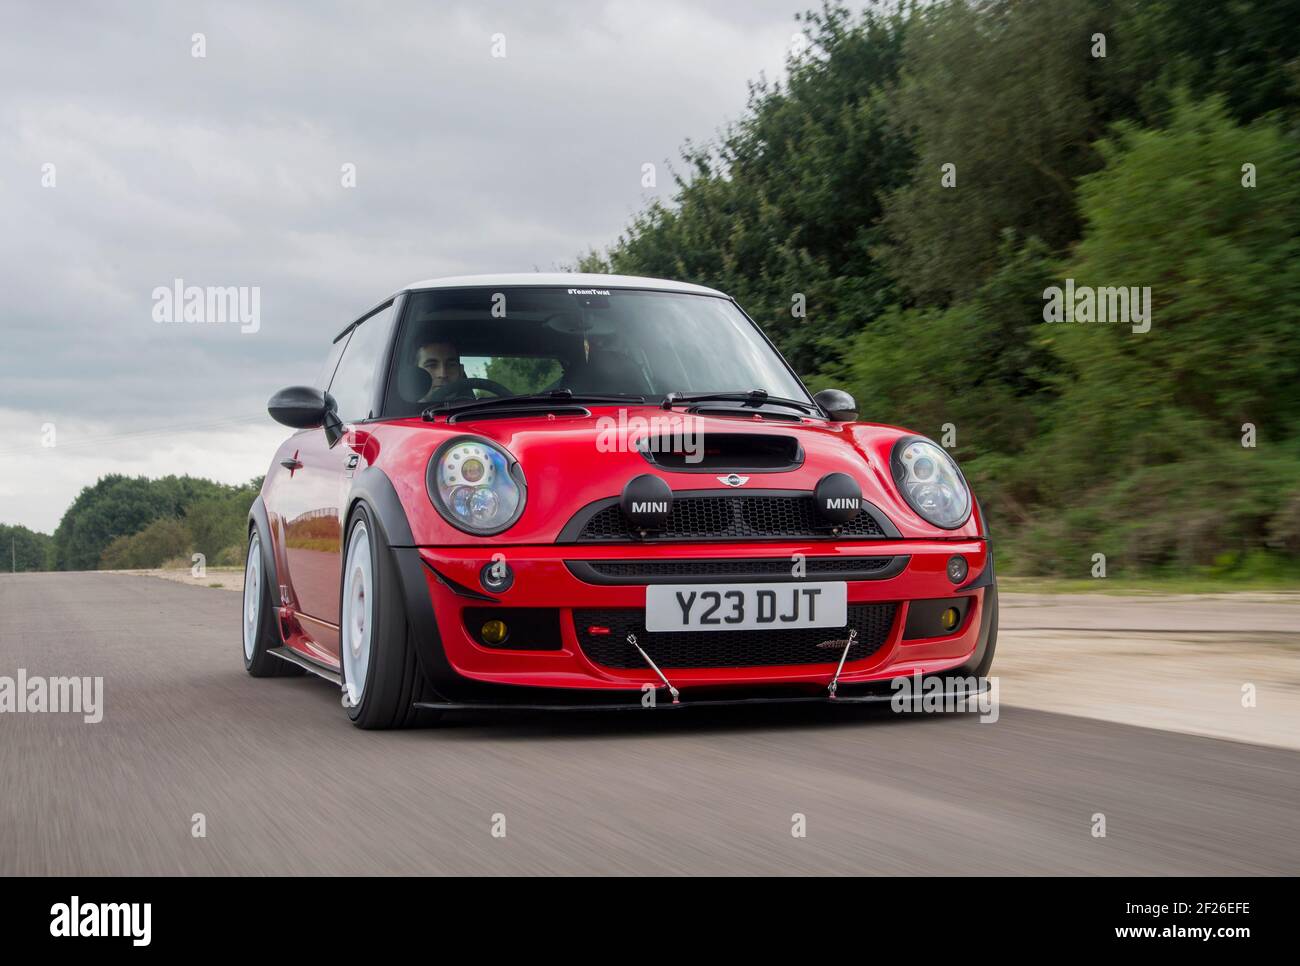 R53 Mini Cooper S, first generation BMW Mini with tuning modifications  Stock Photo - Alamy